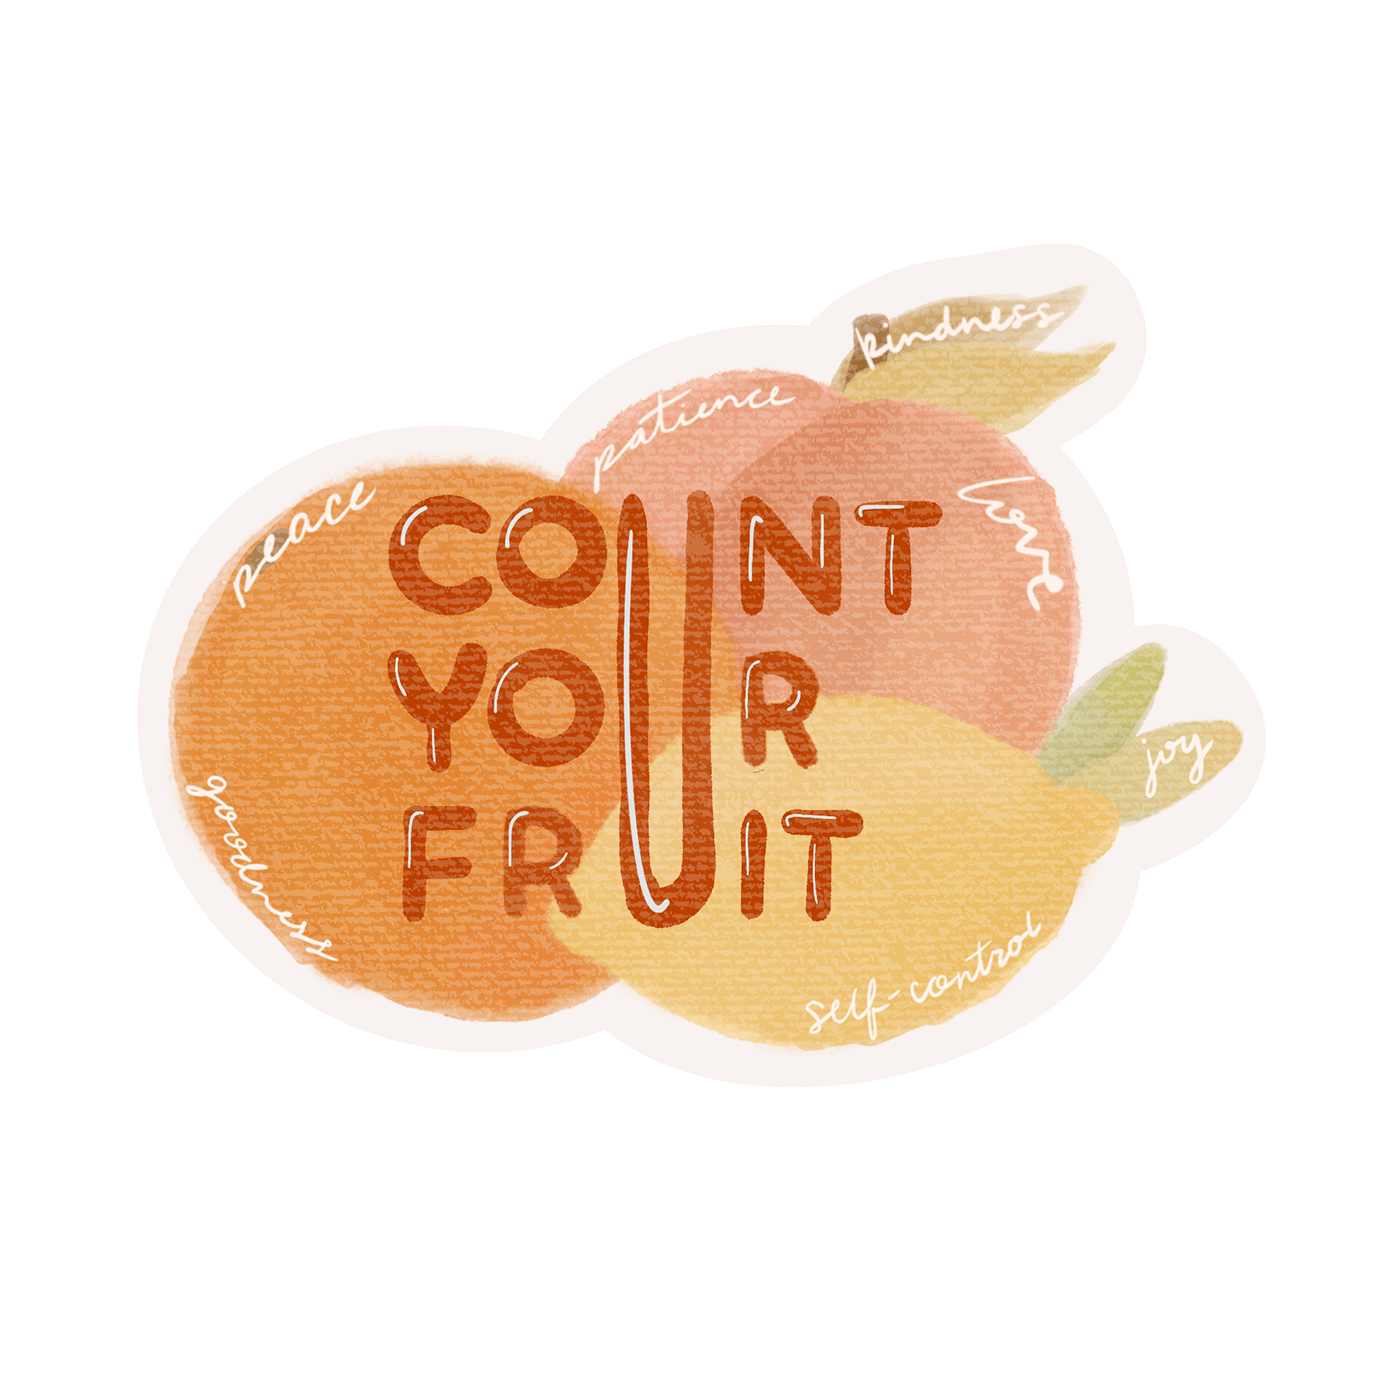 fruits of the spirit